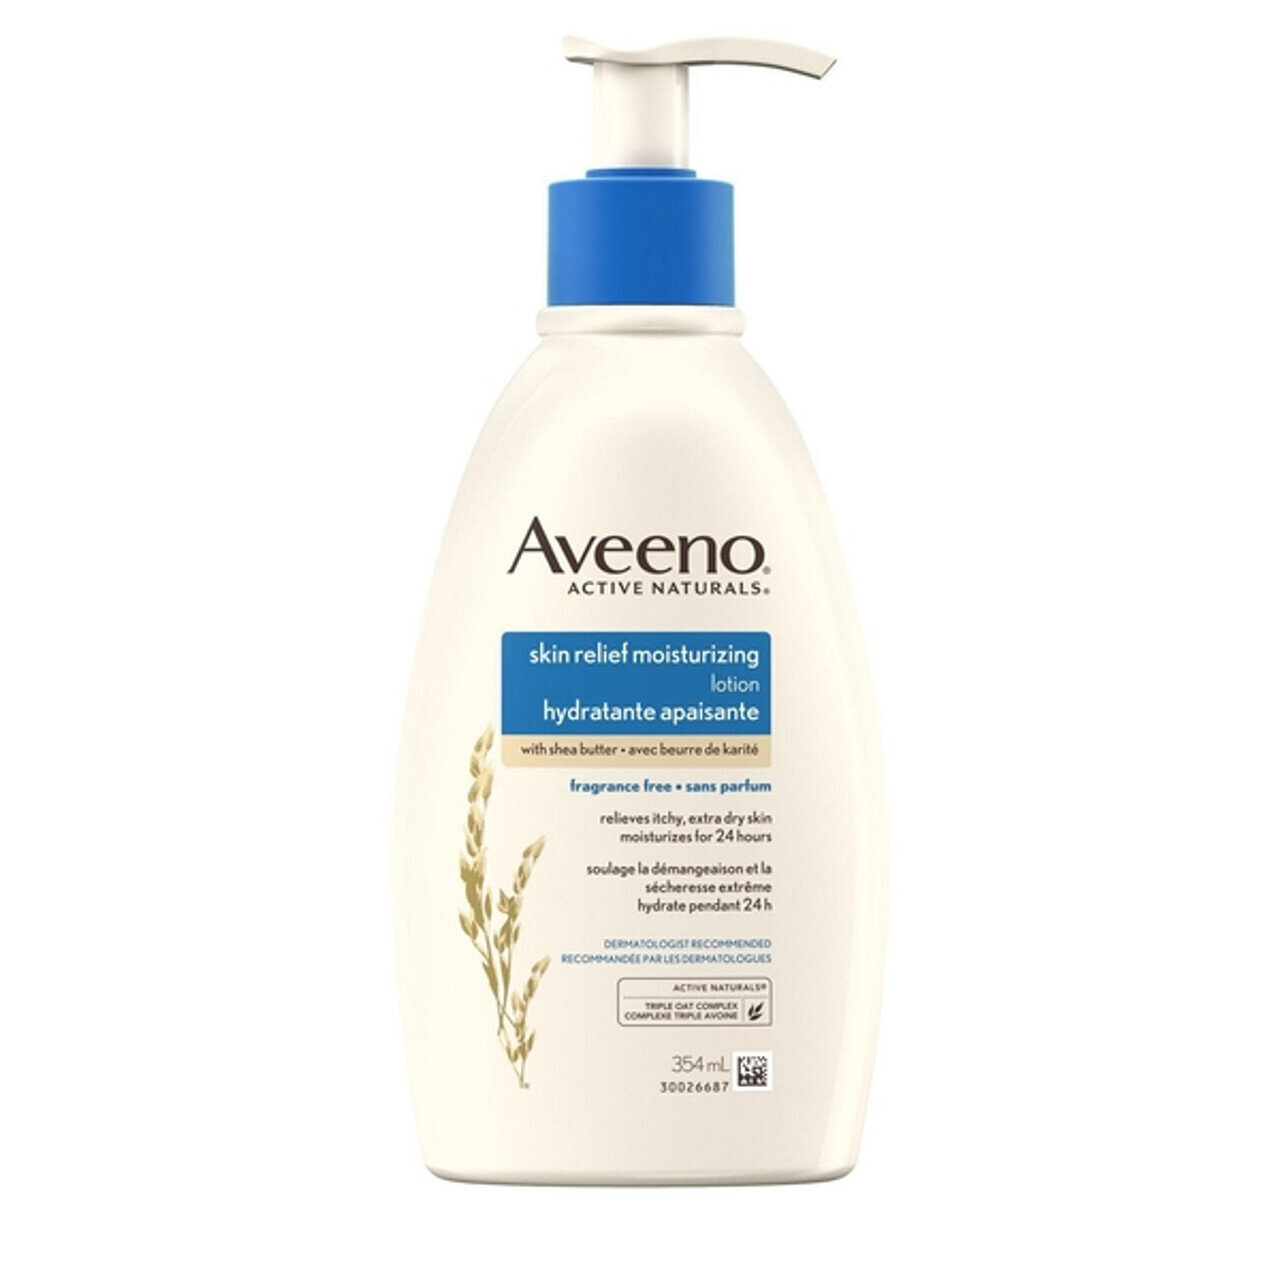 Aveeno Skin Relief Moisturizing Lotion with Shea Butter, 354 ml